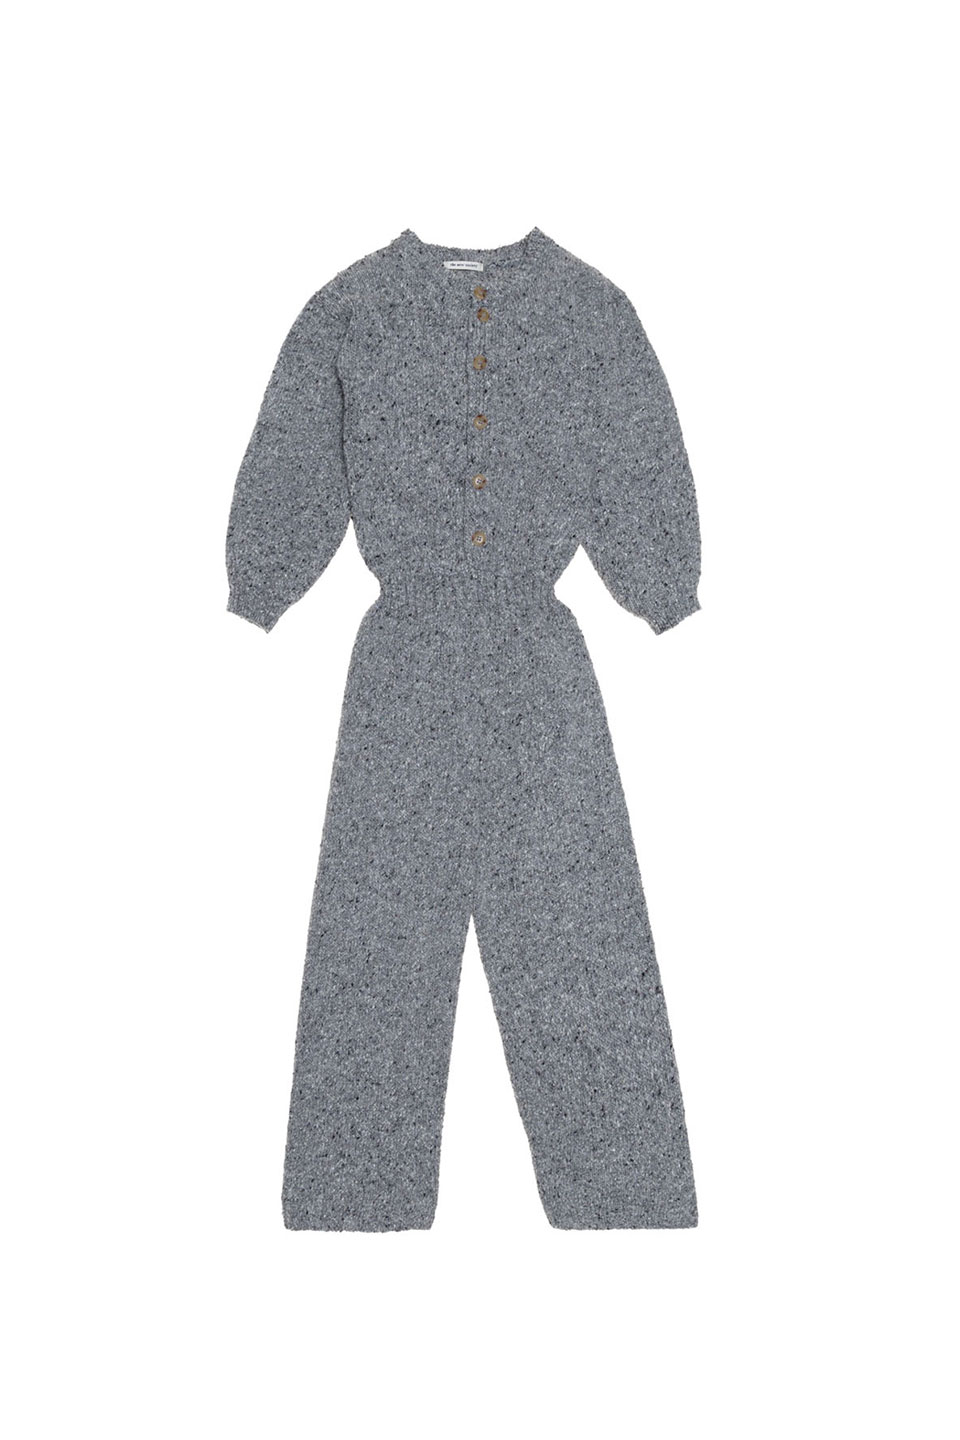 Maia knit jumpsuit Grey - The New Society Kids